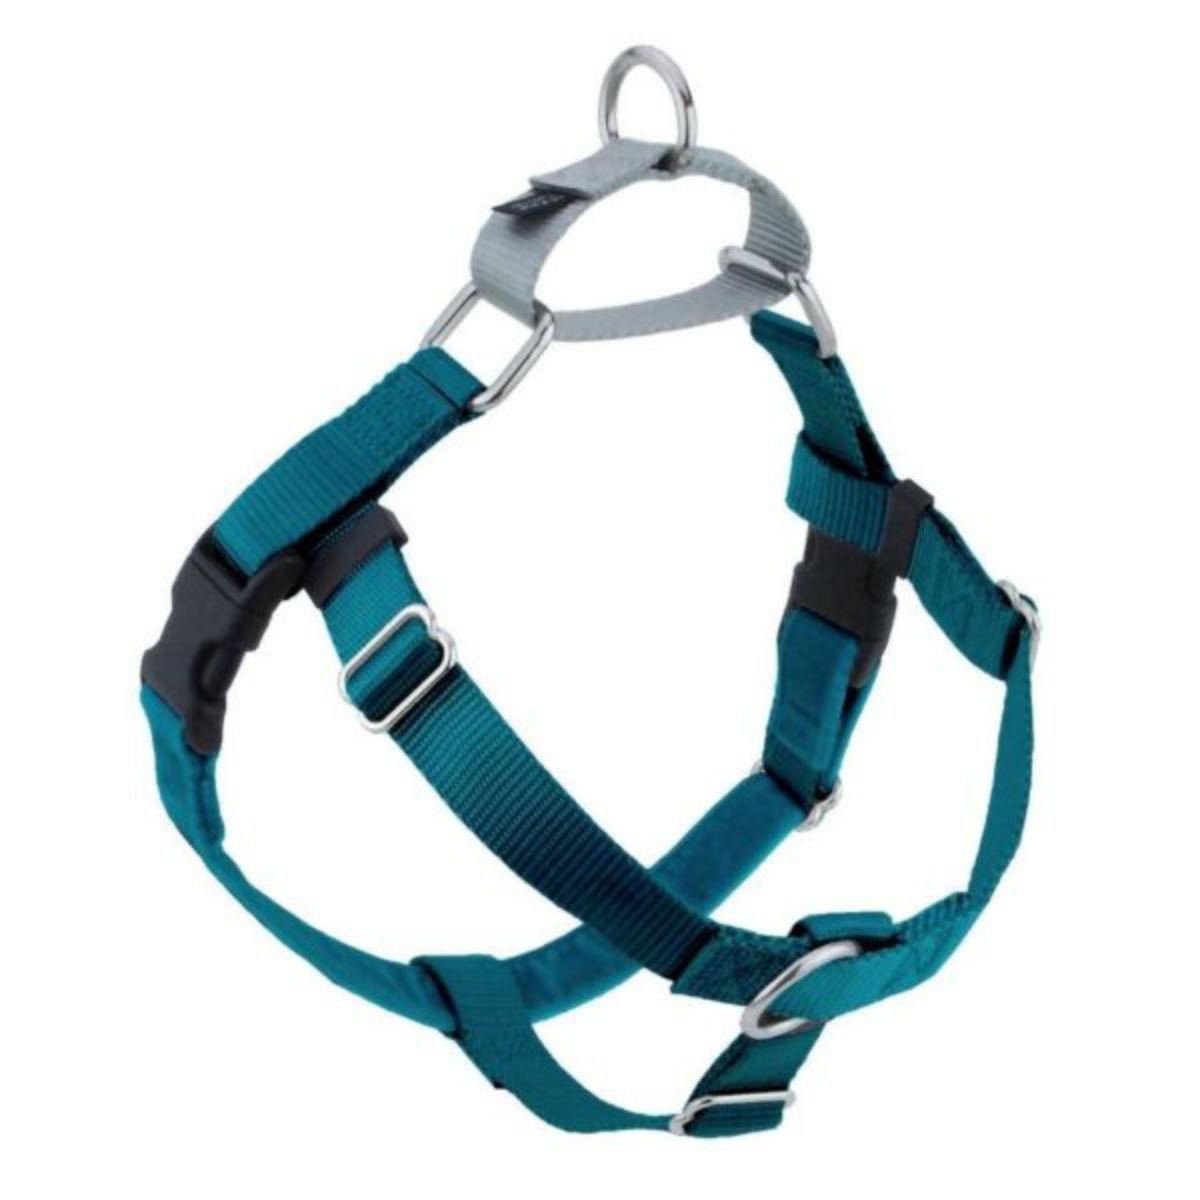 2 Hounds Design No-Pull Dog Harness Deluxe Training Package - Teal and Silver